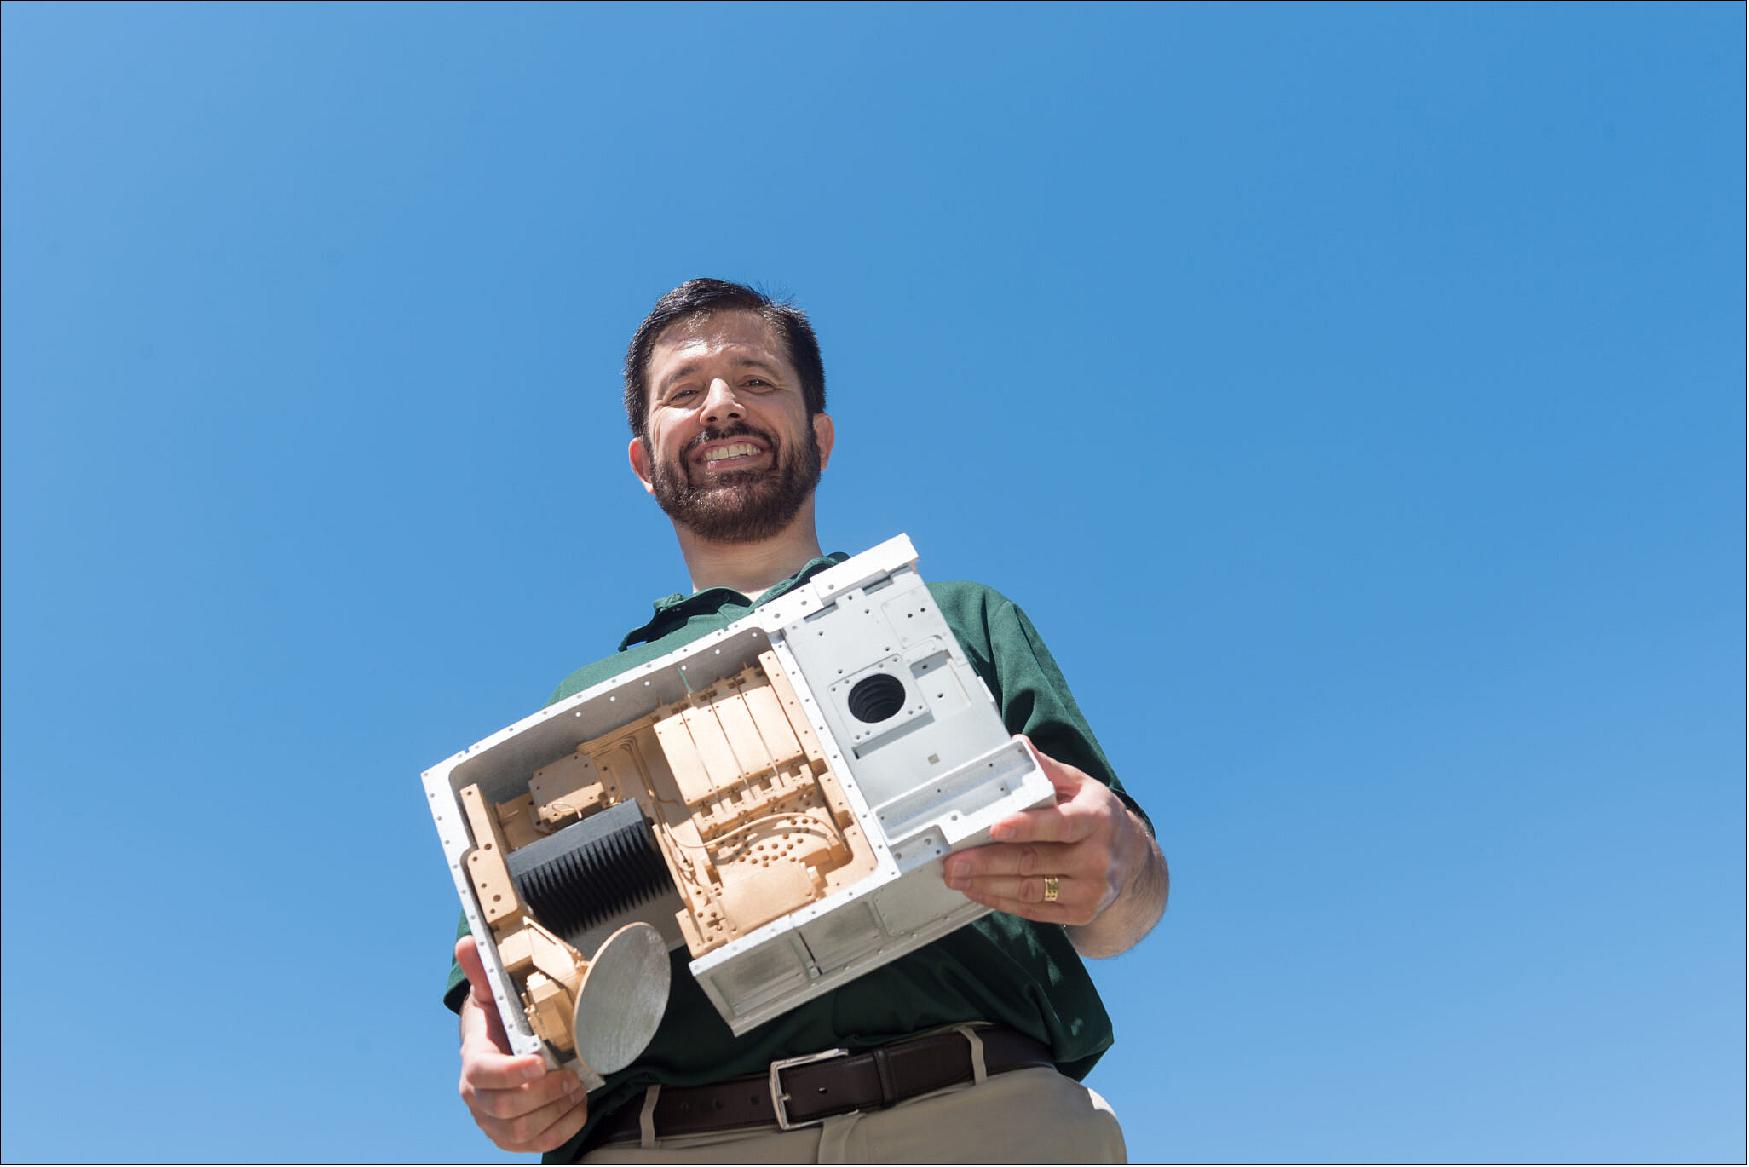 Figure 9: Steven Reising, professor of electrical and computer engineering, holds a model of the TEMPEST-D satellite. After meeting all its benchmarks for demonstrating small-satellite weather forecasting capabilities during its first 90 days, a Colorado State University experimental satellite is operating after more than one year in low-Earth orbit (image credit: Bill Cotton)